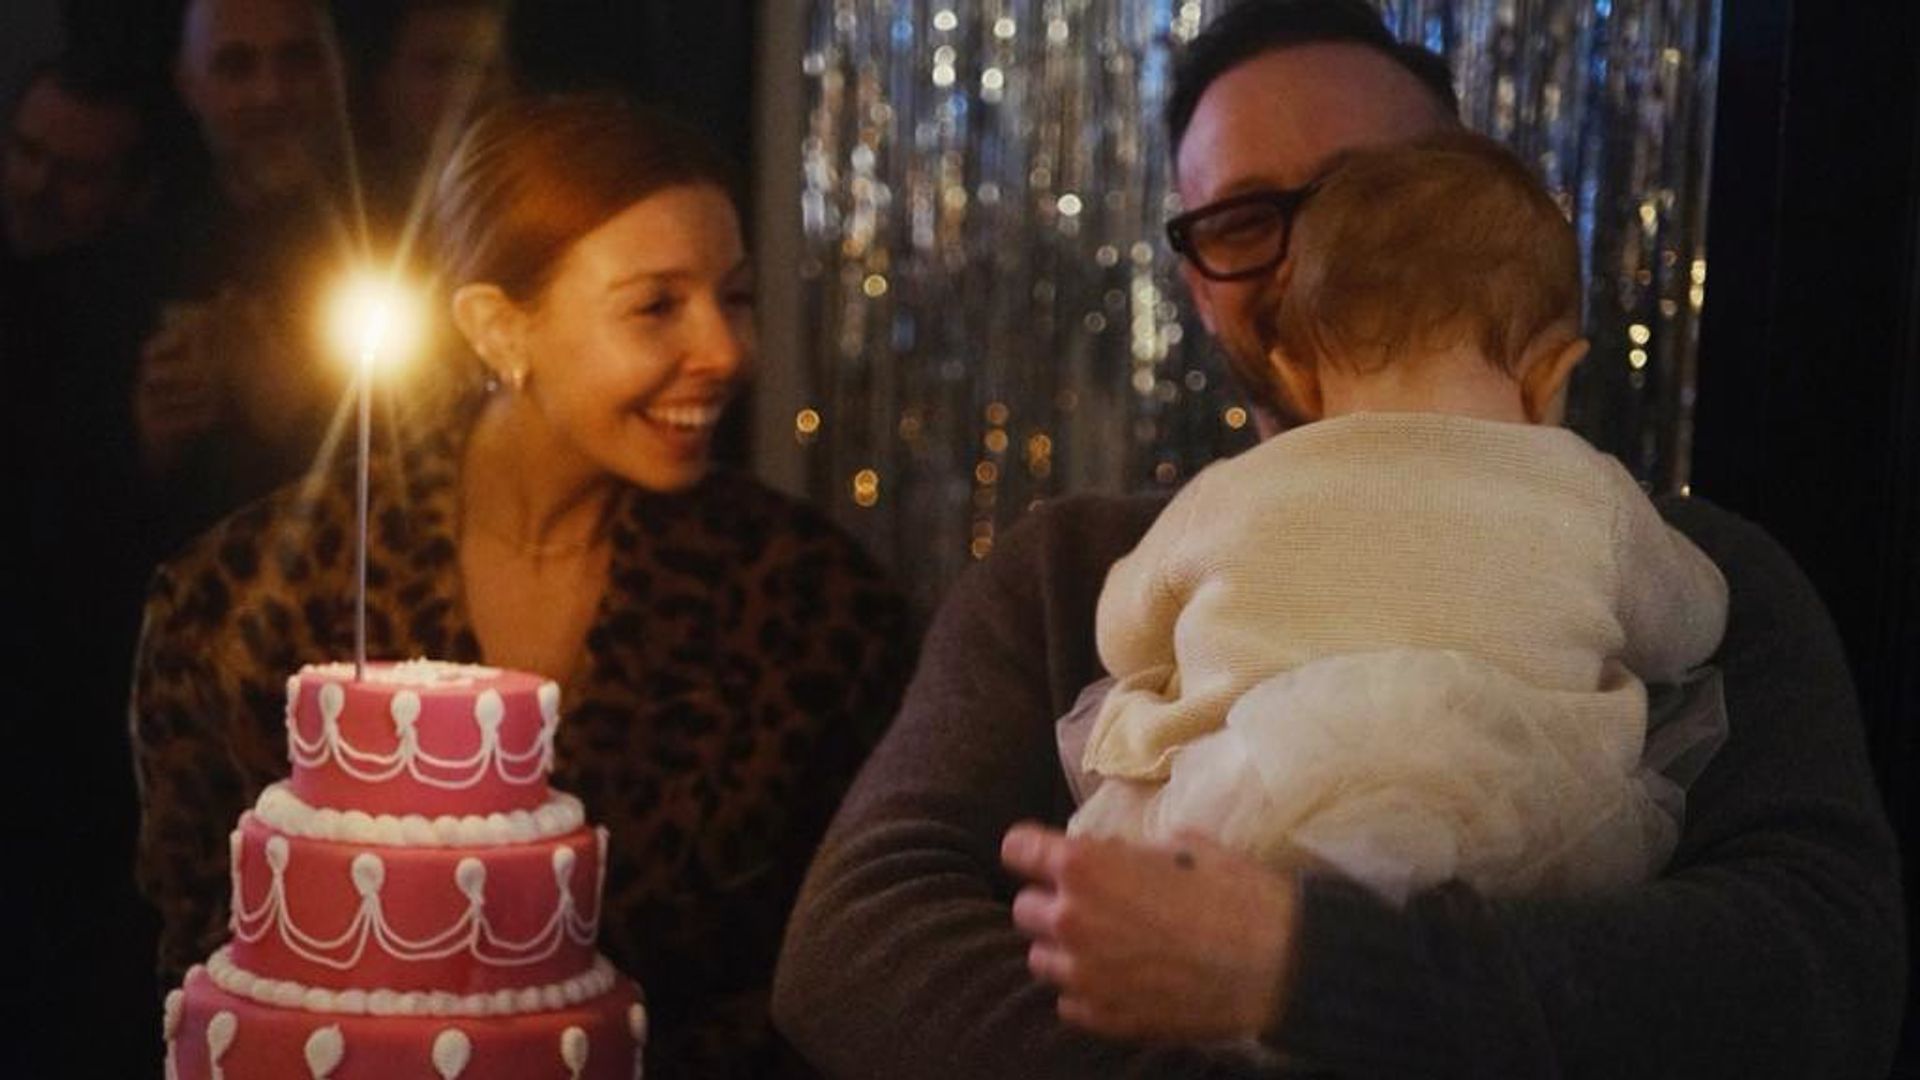 Stacey Dooley and Kevin Clifton marked baby Minnie's first birthday